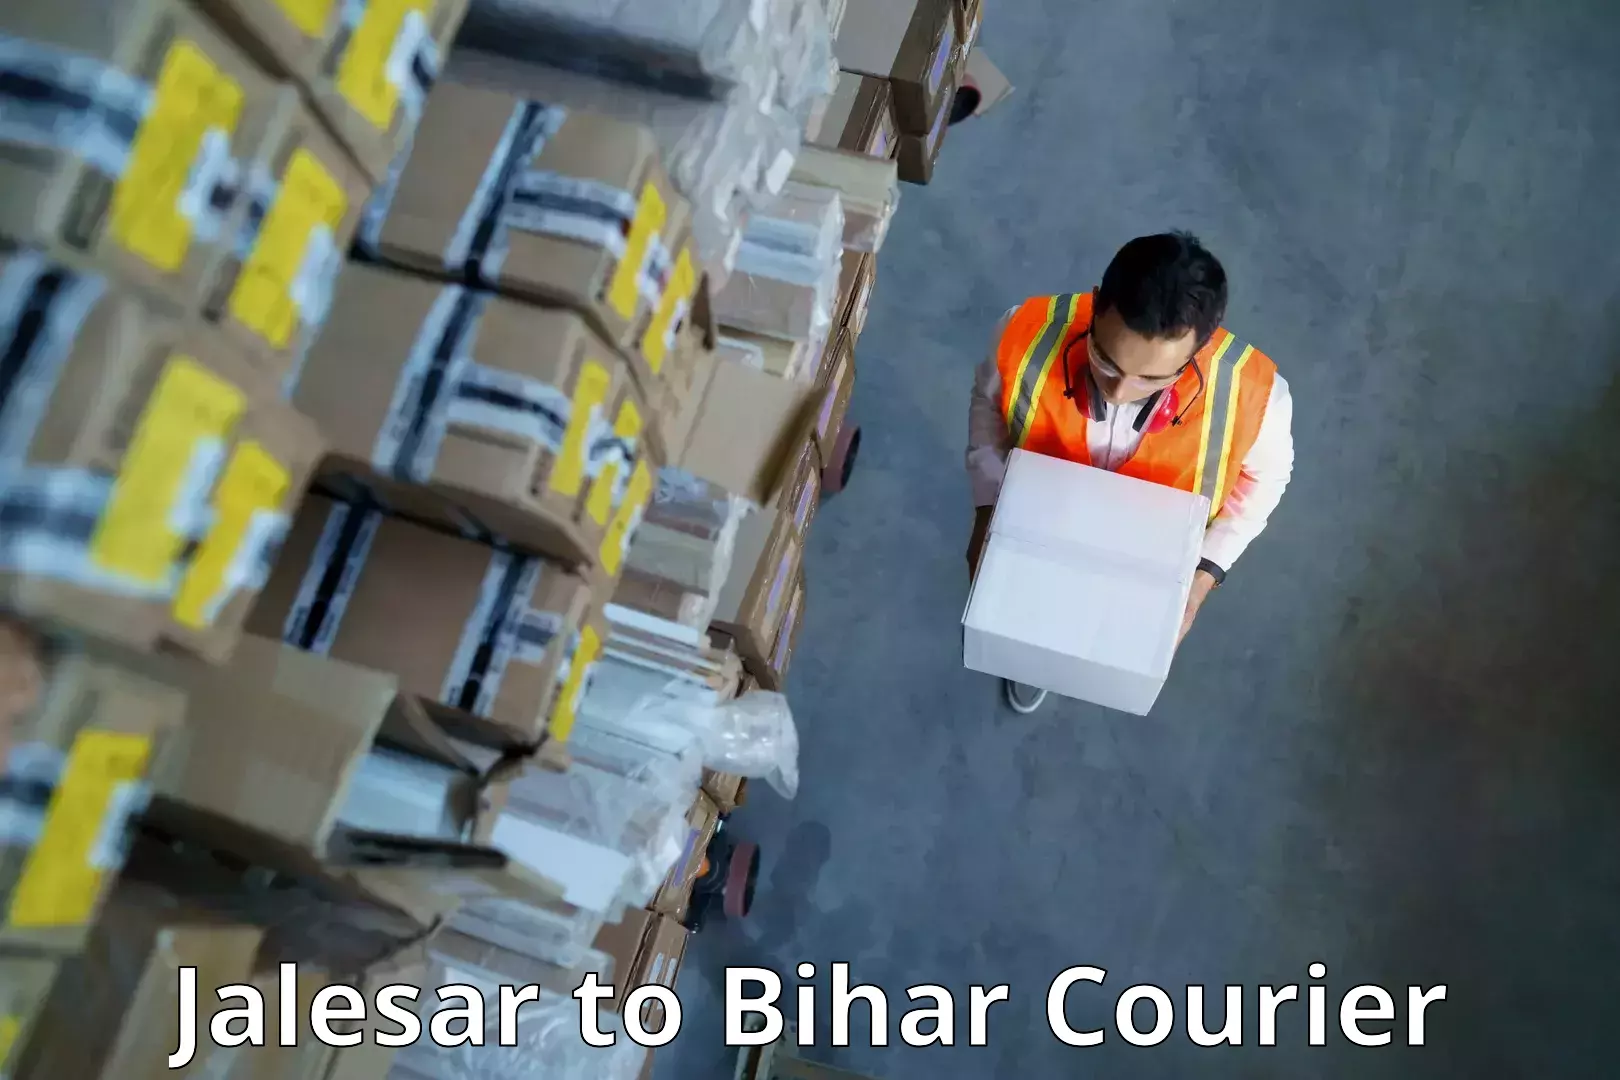 On-call courier service Jalesar to Bihar